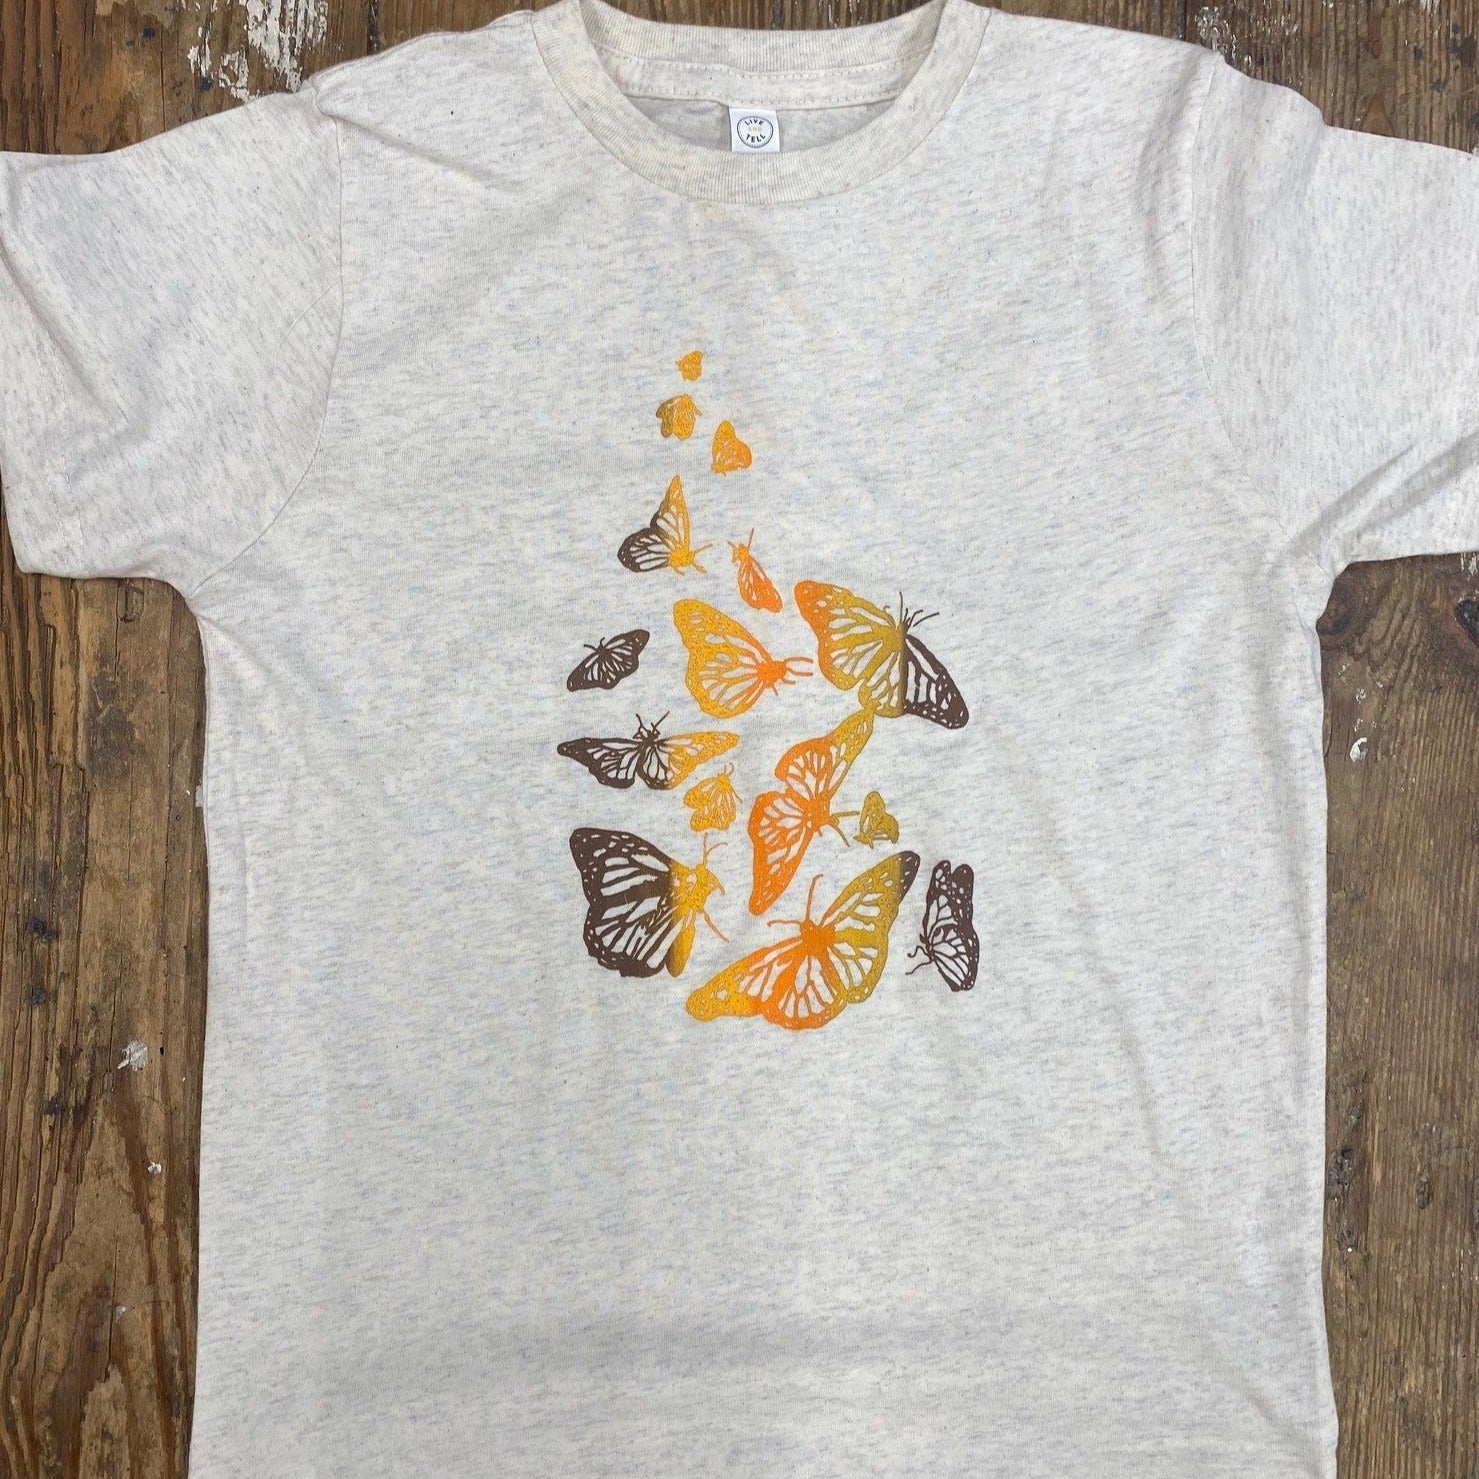 A heather cream t-shirt with monarch butterflies on the front.